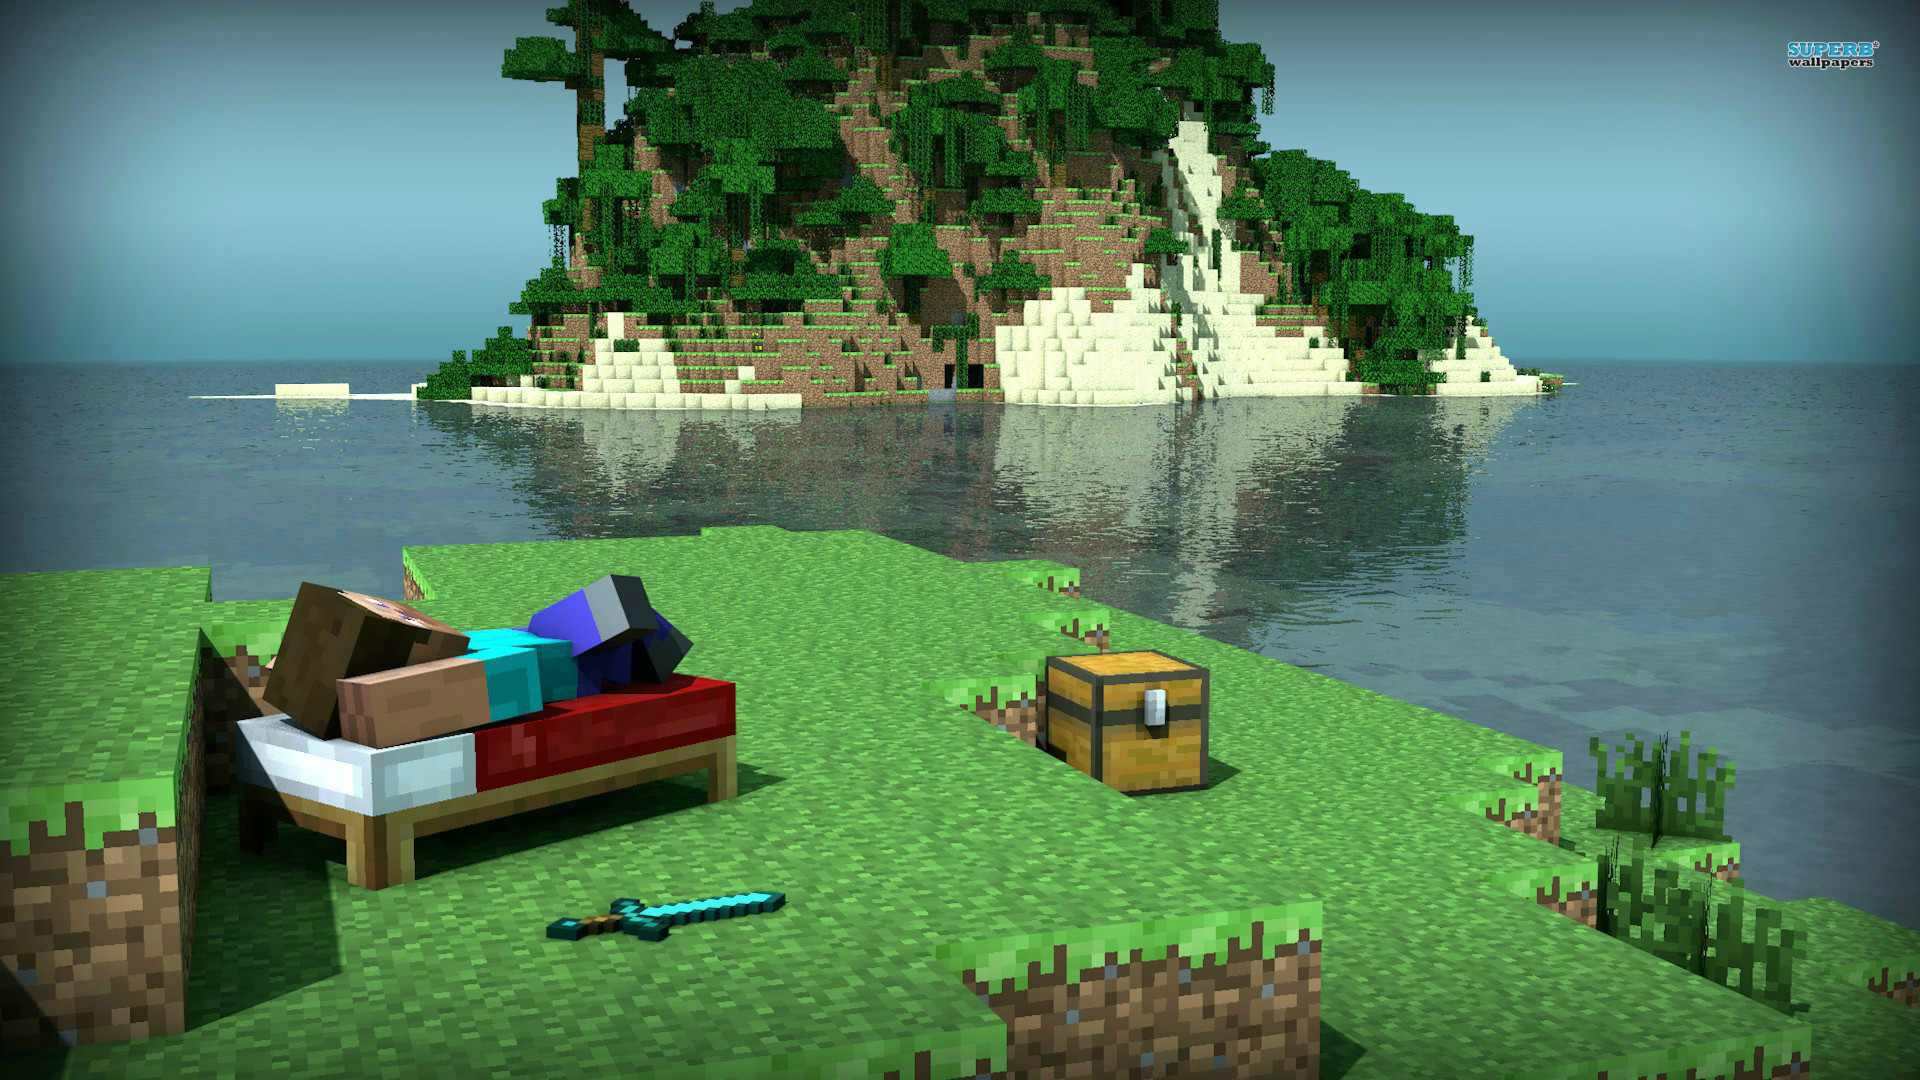 1920x1080 100% Quality Minecraft HD Wallpapers, 